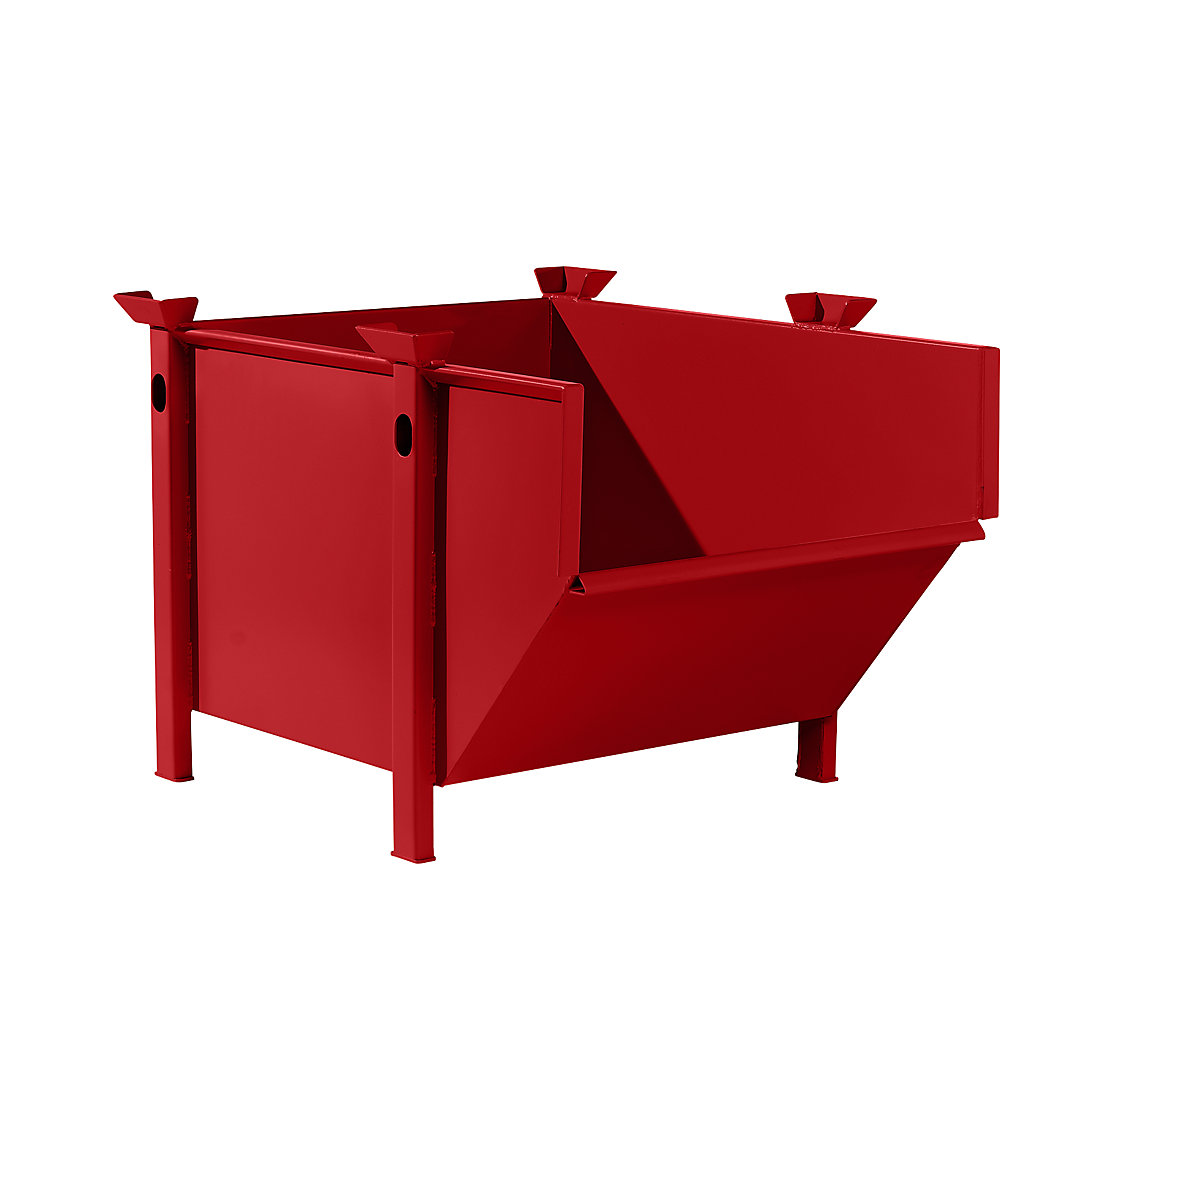 Sheet steel container – eurokraft pro, capacity 0.5 m³, without folding chute, flame red-5